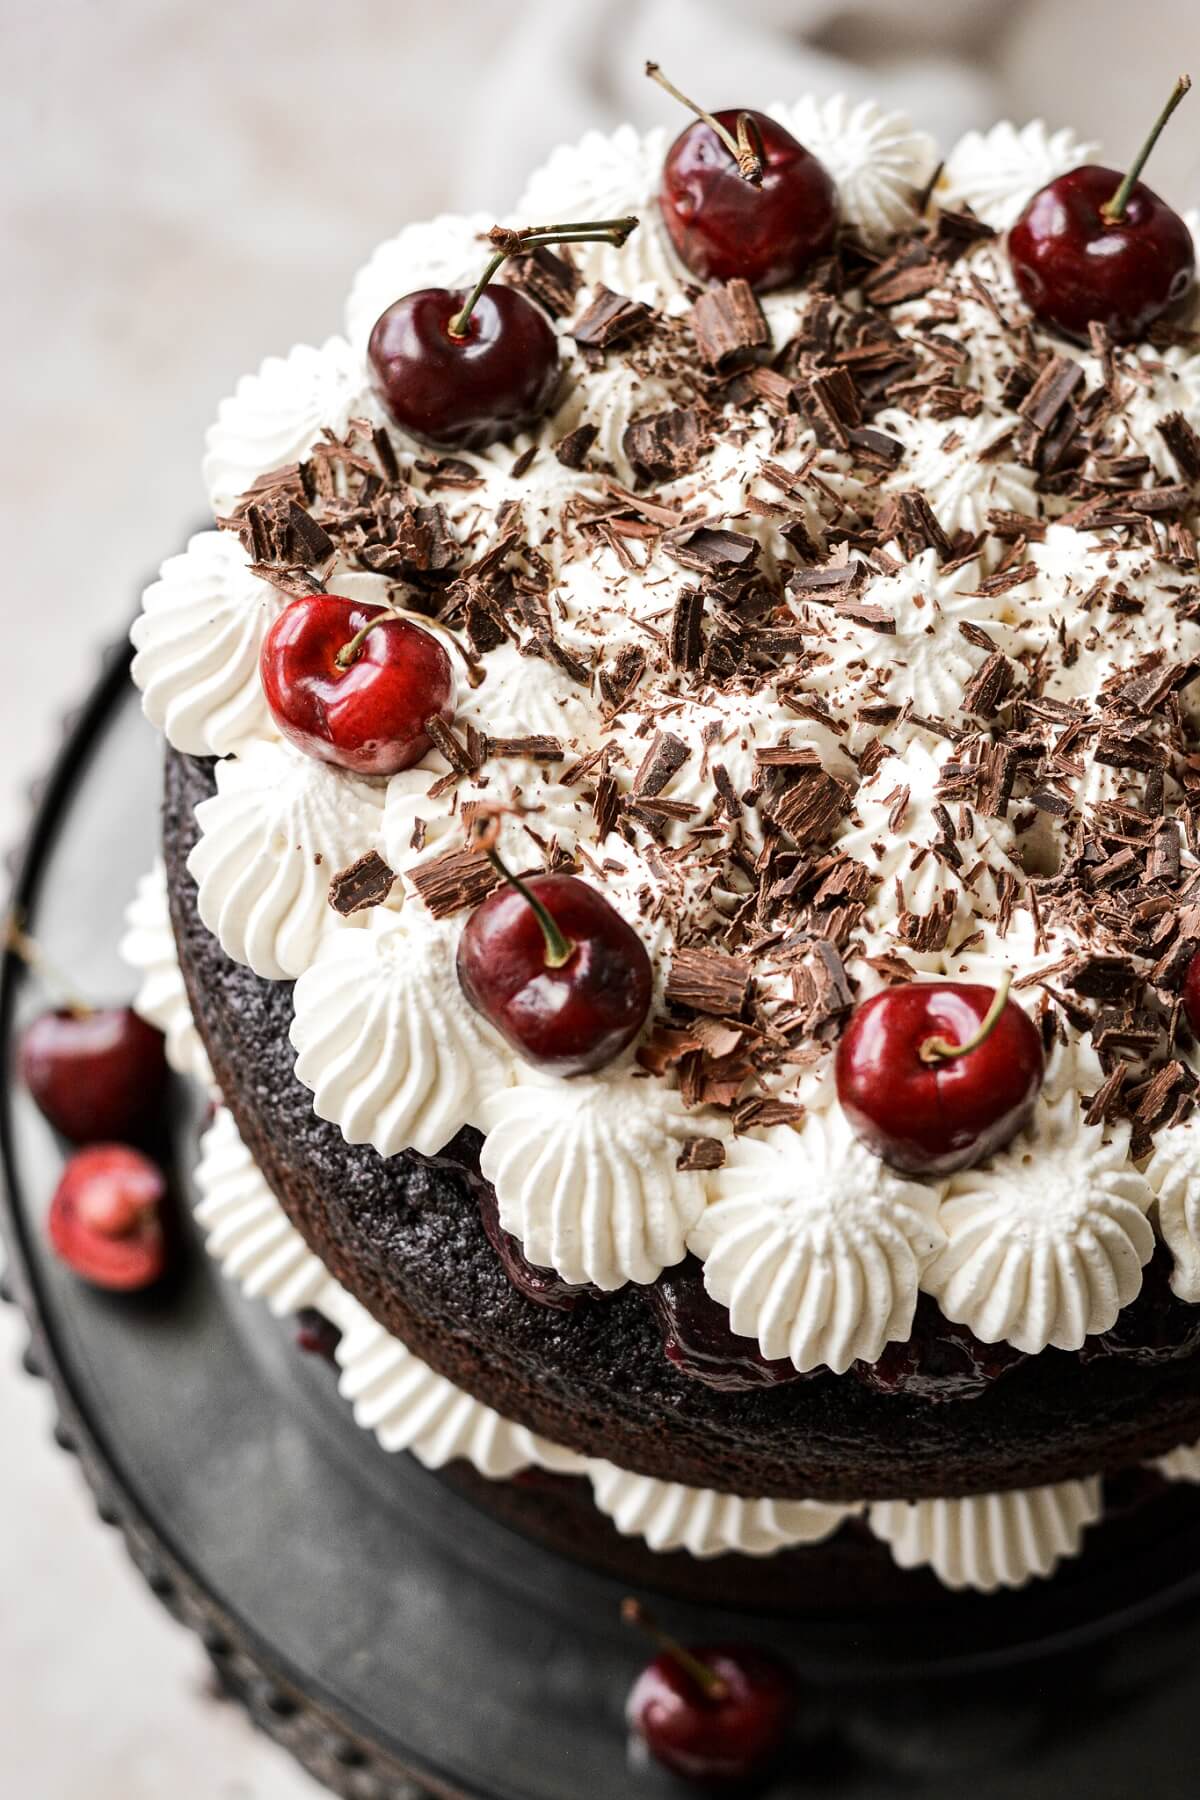 Black forest cake with layers of chocolate cake, cherries, whipped cream and chocolate shavings.